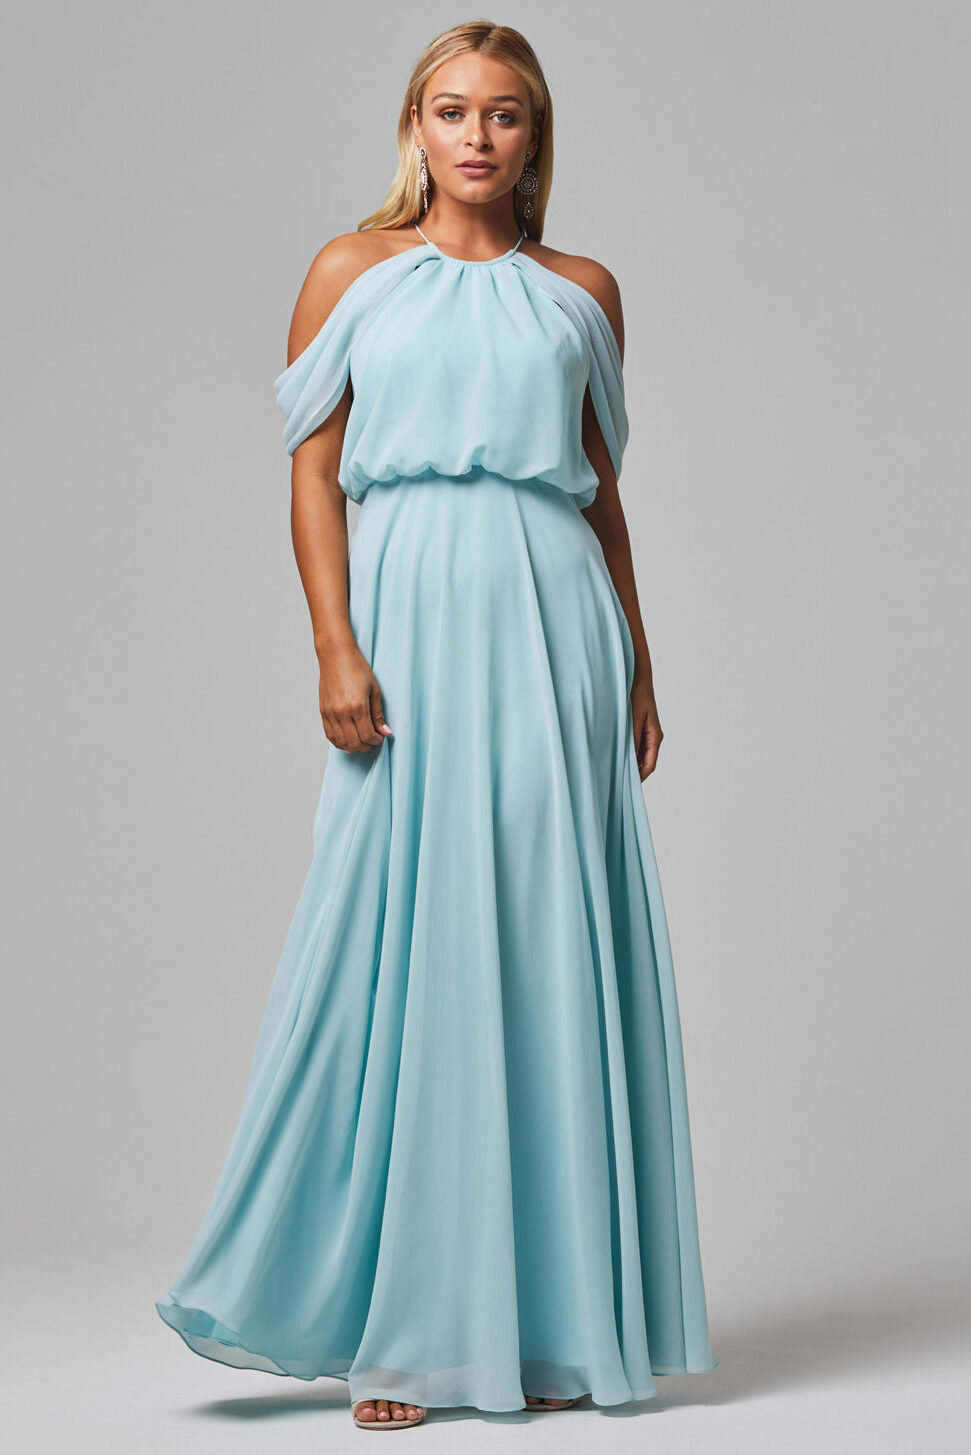 KASSIDY TO821 Bridesmaids dress by Tania Olsen Designs